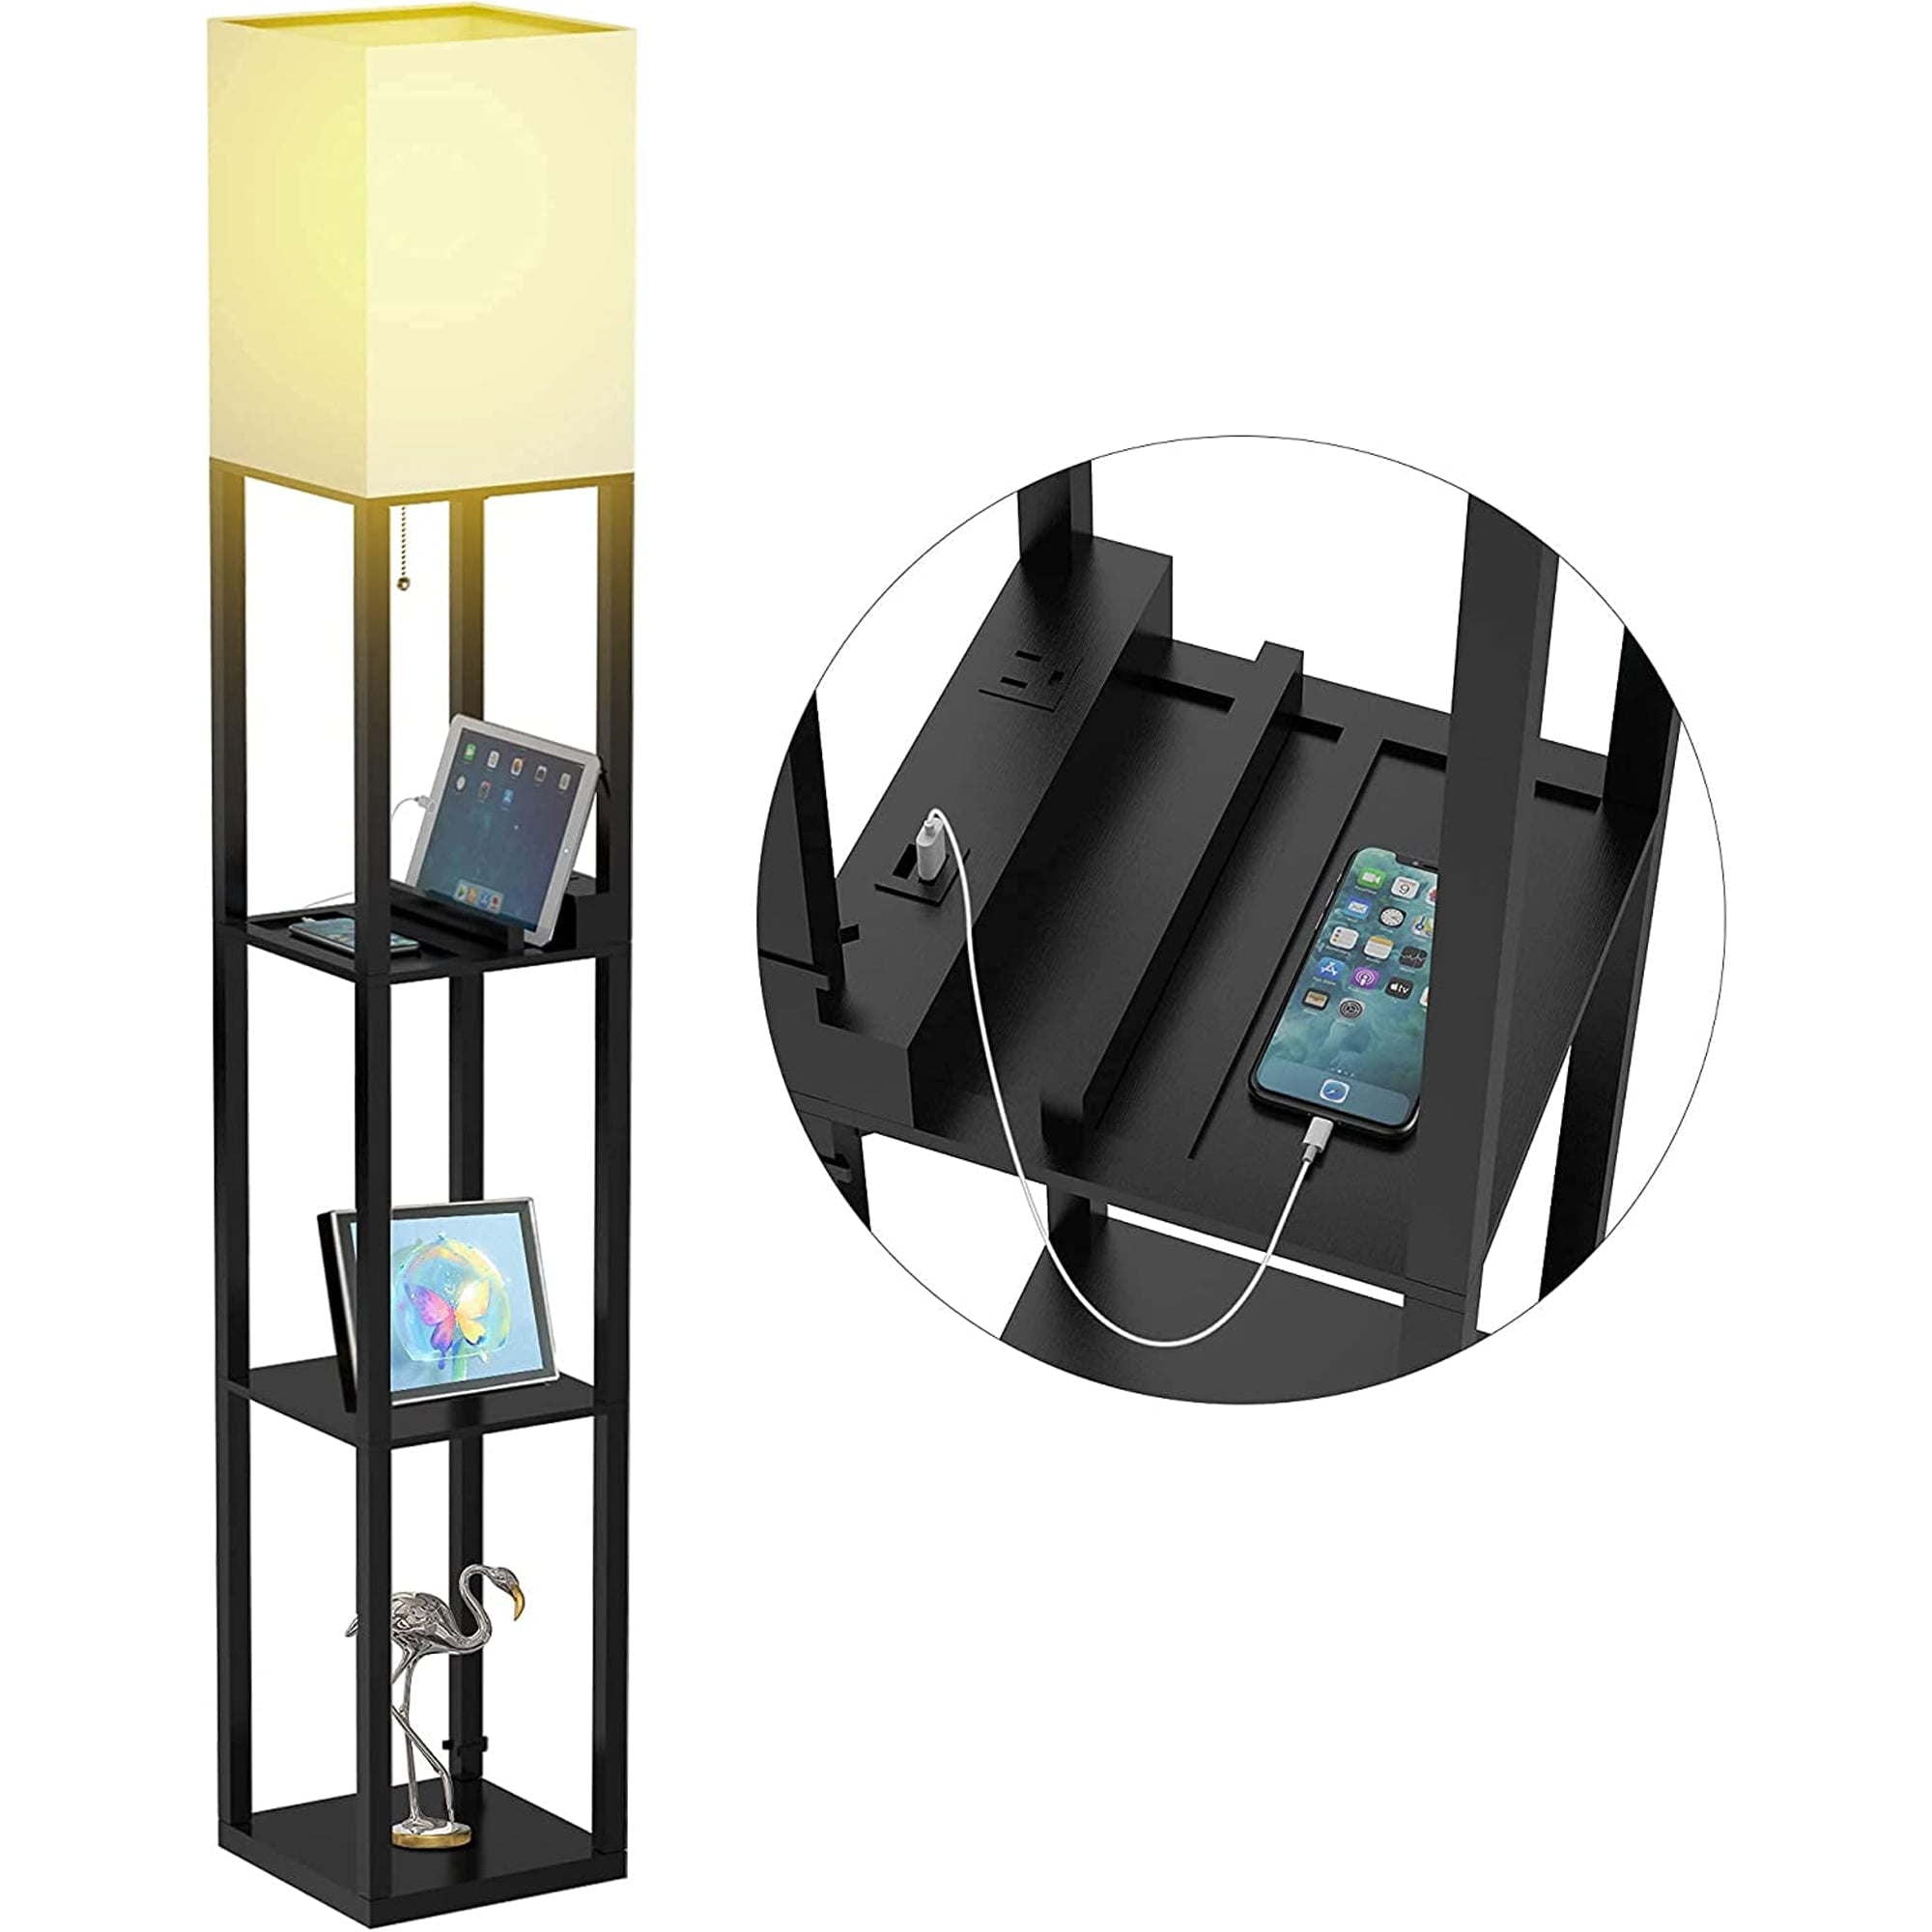 Floor Lamp with Shelf; Solid Wood Shelf Floor Lamp with 2 Charging Ports and 1 Power Outlet; Bedroom Floor Lamp; Living Room Lamp; Matte Black floor lamp with built-in shelves and USB charging ports, shown charging multiple devices, with an inset close-up on the charging slot.